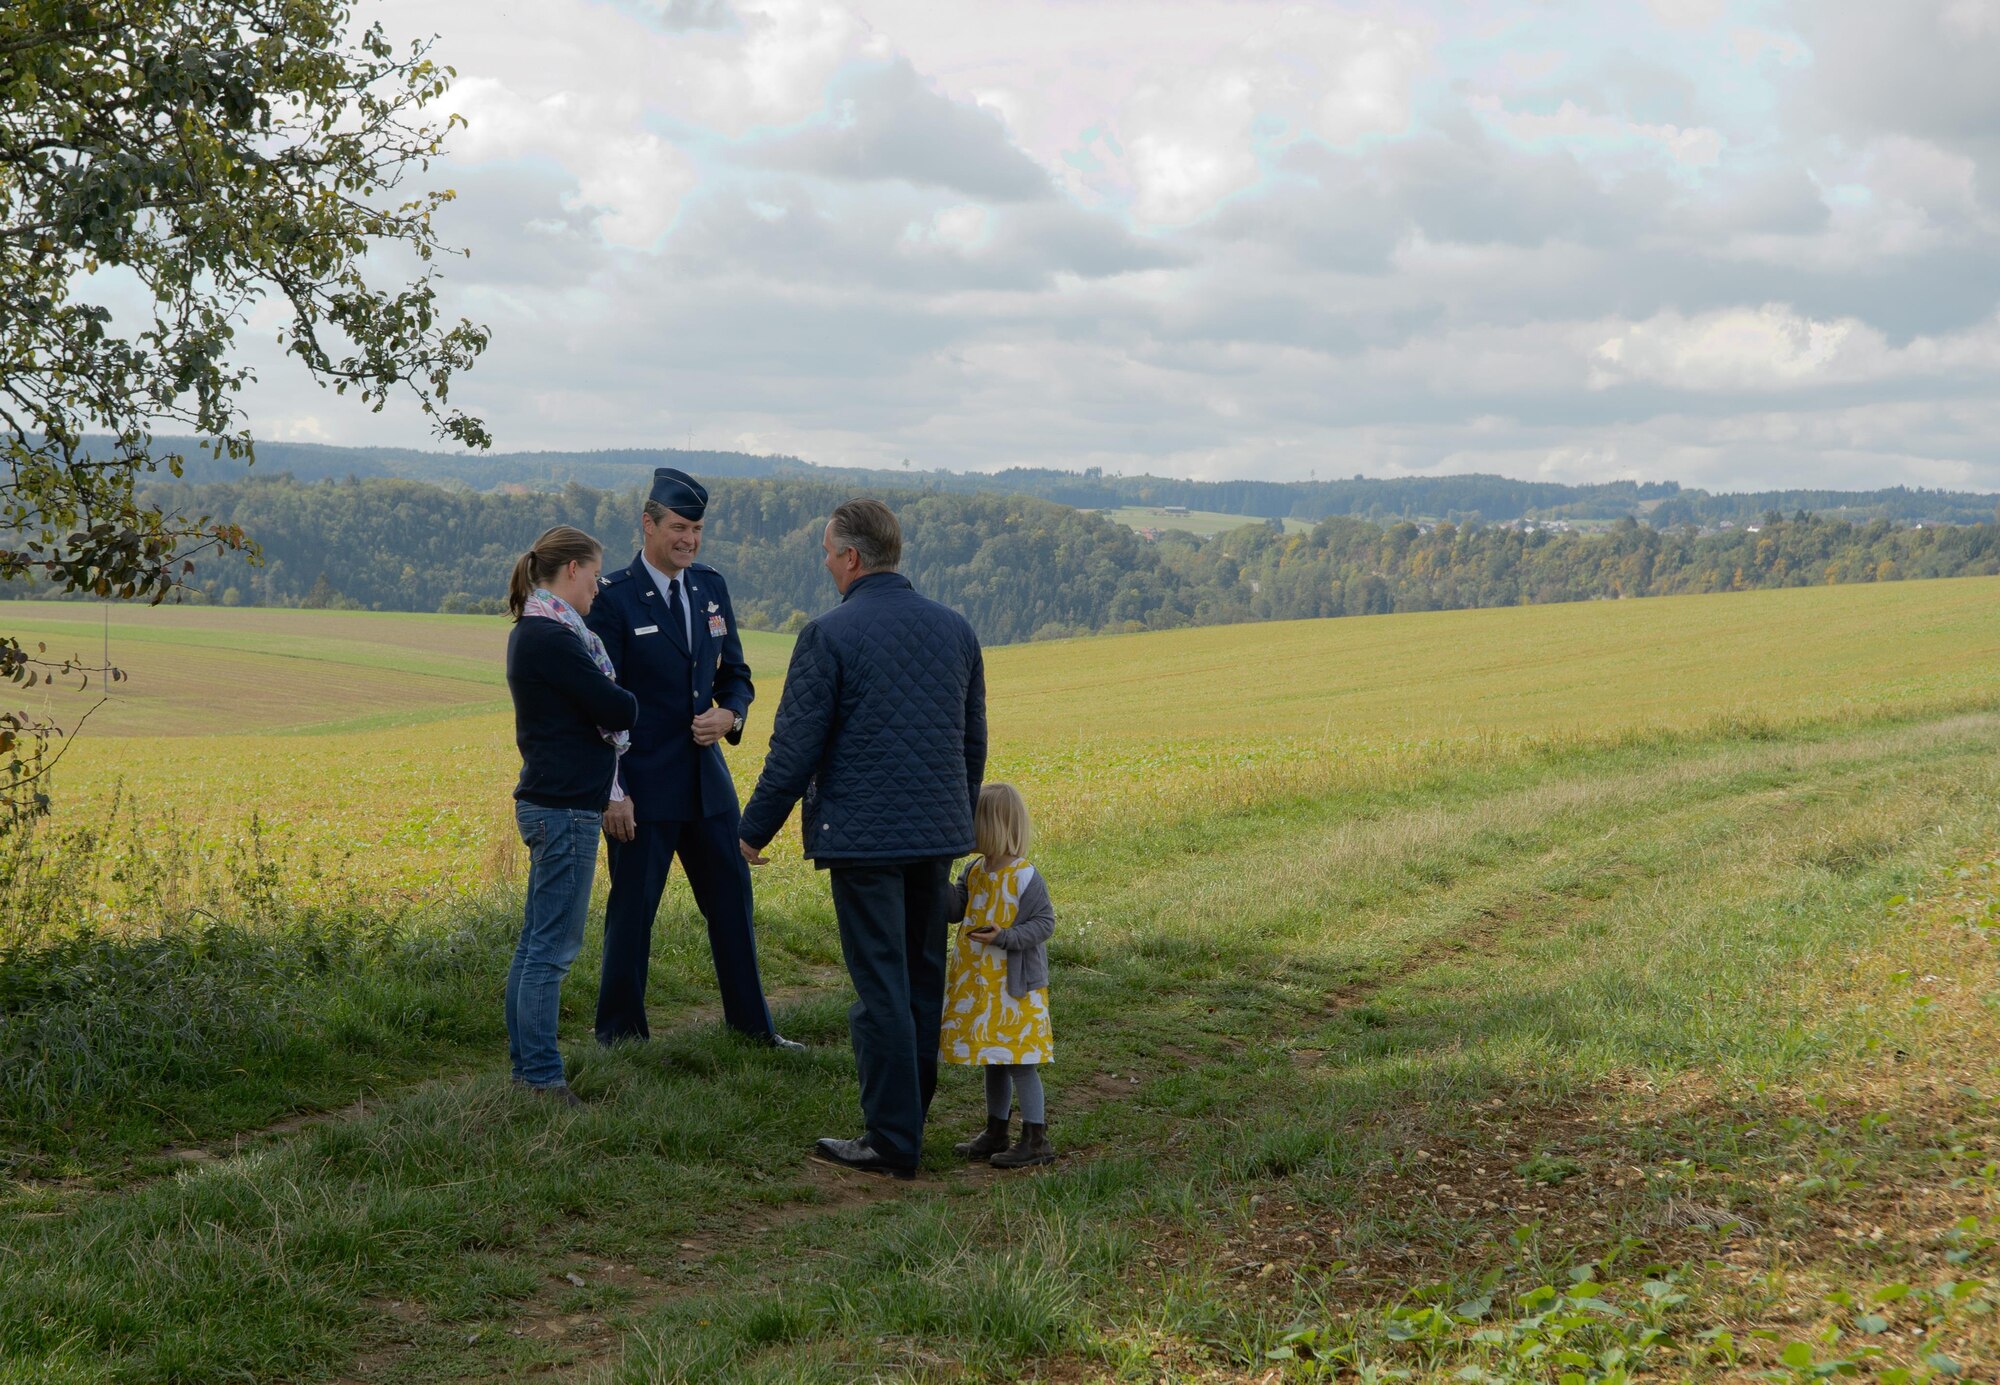 Col. Harry Benham, U.S. Air Forces in Europe-Air Forces Africa operations and plans chief, speaks with the owners of the land Sept. 25, 2015, in Dietingen, Germany, where 2nd Lt. Priesley Cooper Jr.’s P-51 D Mustang was shot down. Cooper was killed in action during a strafing run in World War II. The town of Dietingen buried him and 70 years later held a ceremony to honor him. (U.S. Air Force photo/Staff Sgt. Armando A. Schwier-Morales) 